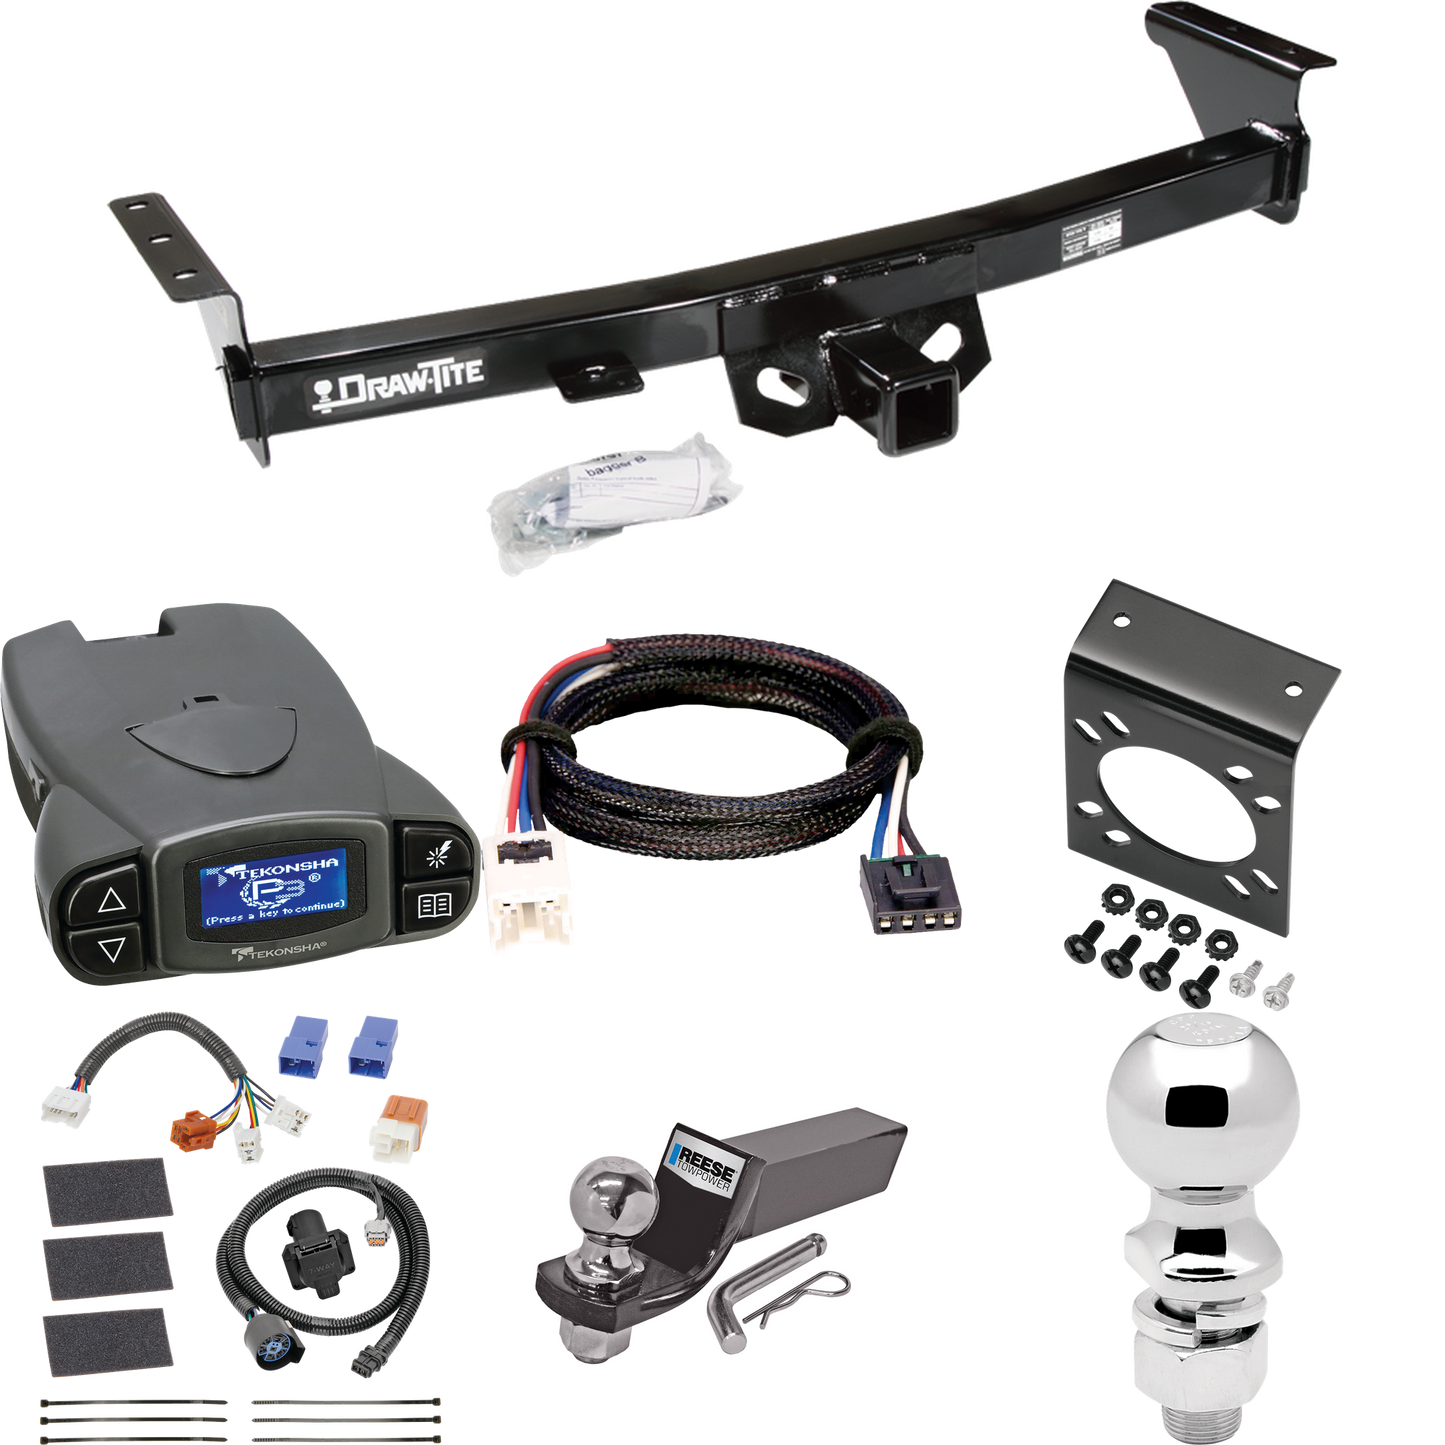 Fits 2005-2023 Nissan Frontier Trailer Hitch Tow PKG w/ Tekonsha Prodigy P3 Brake Control + Plug & Play BC Adapter + 7-Way RV Wiring + 2" & 2-5/16" Ball & Drop Mount By Draw-Tite